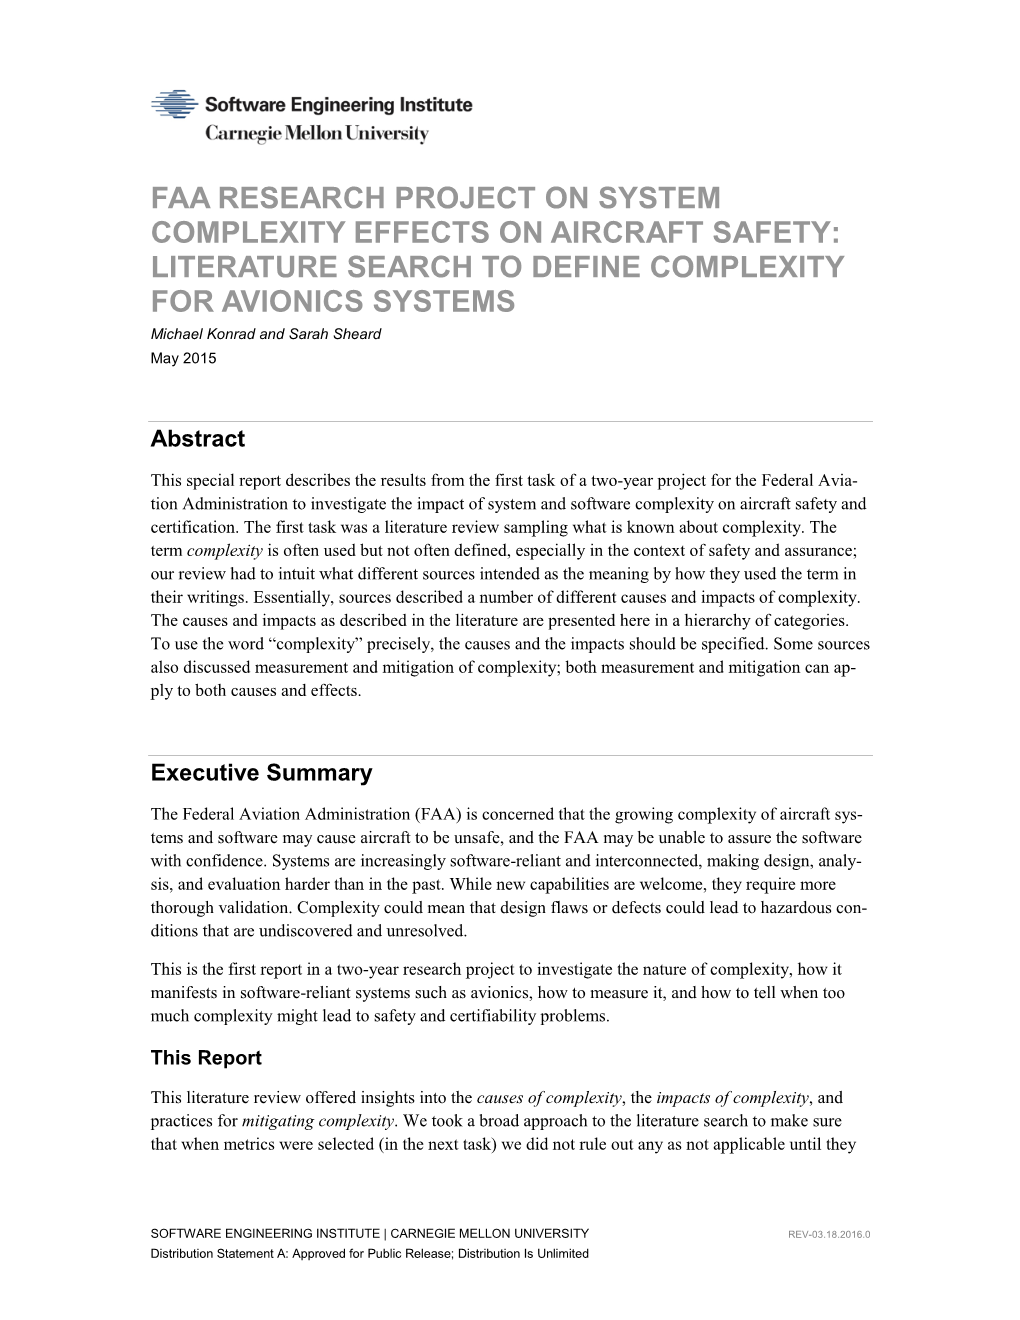 FAA Research Project on System Complexity Effects on Aircraft Safety: Literature Search to Define Complexity for Avionics System